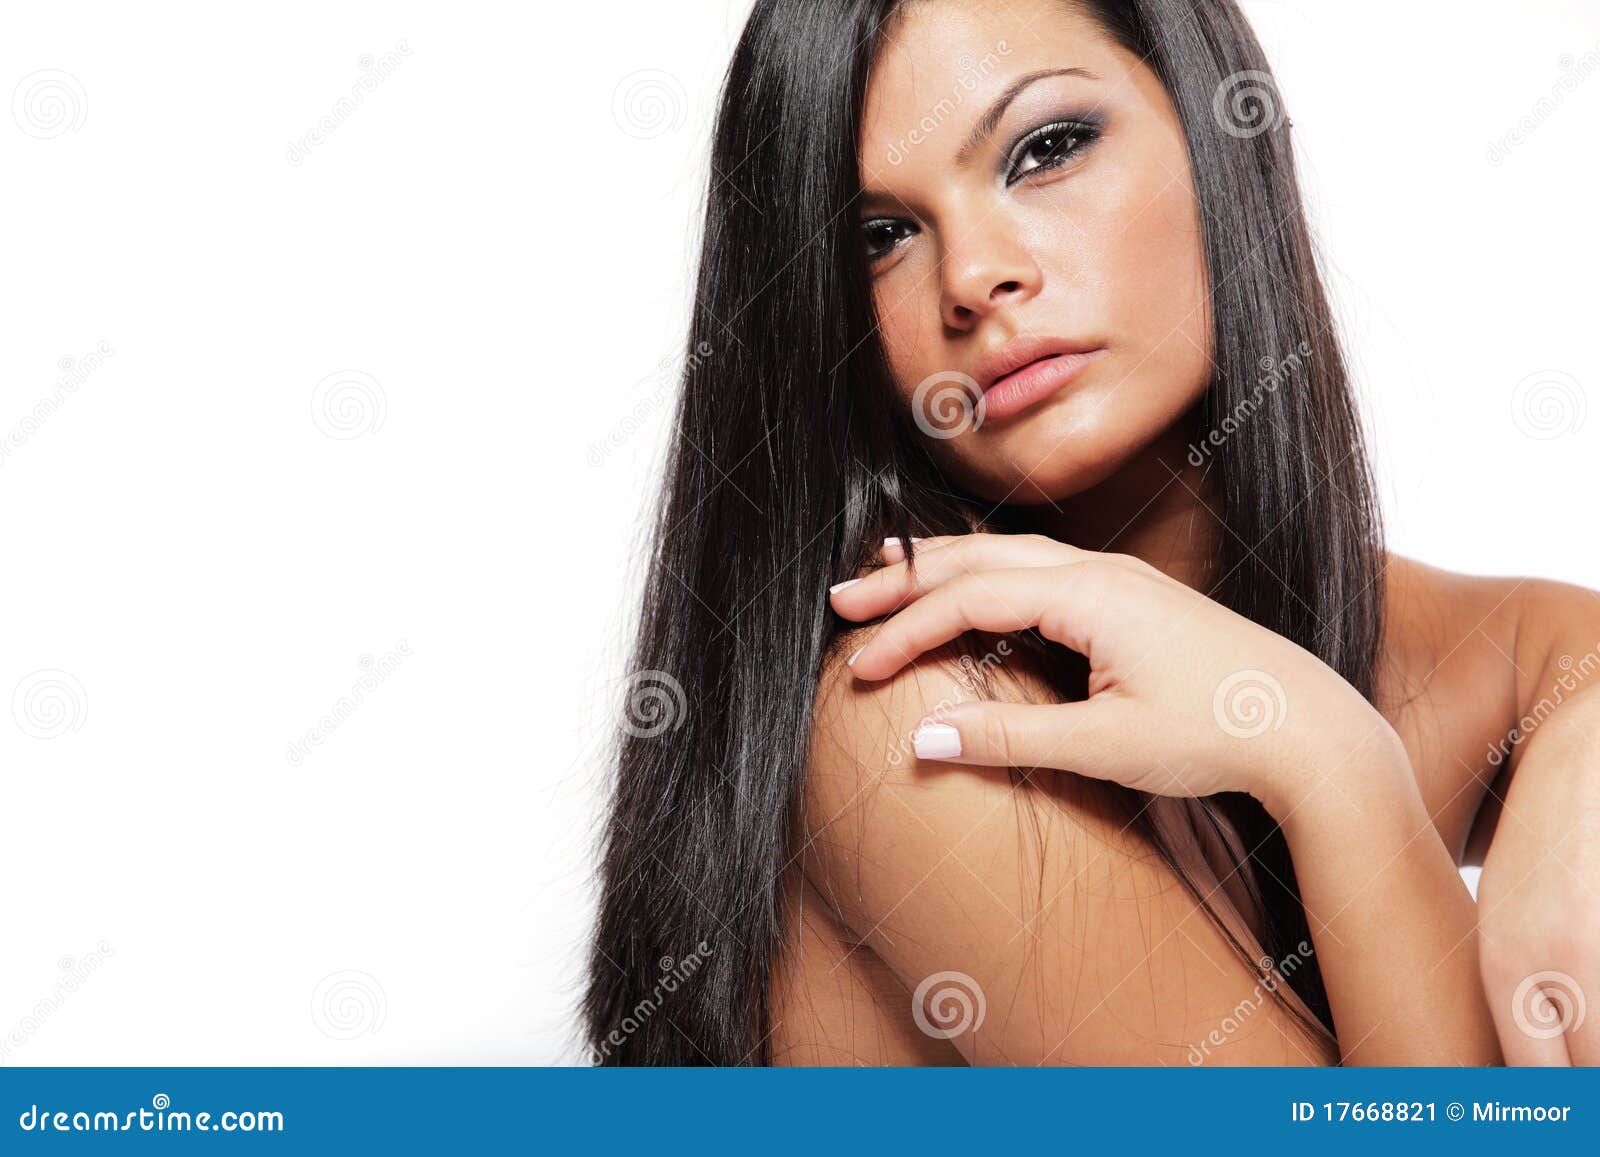 Girl with Long Black Hair - wide 5